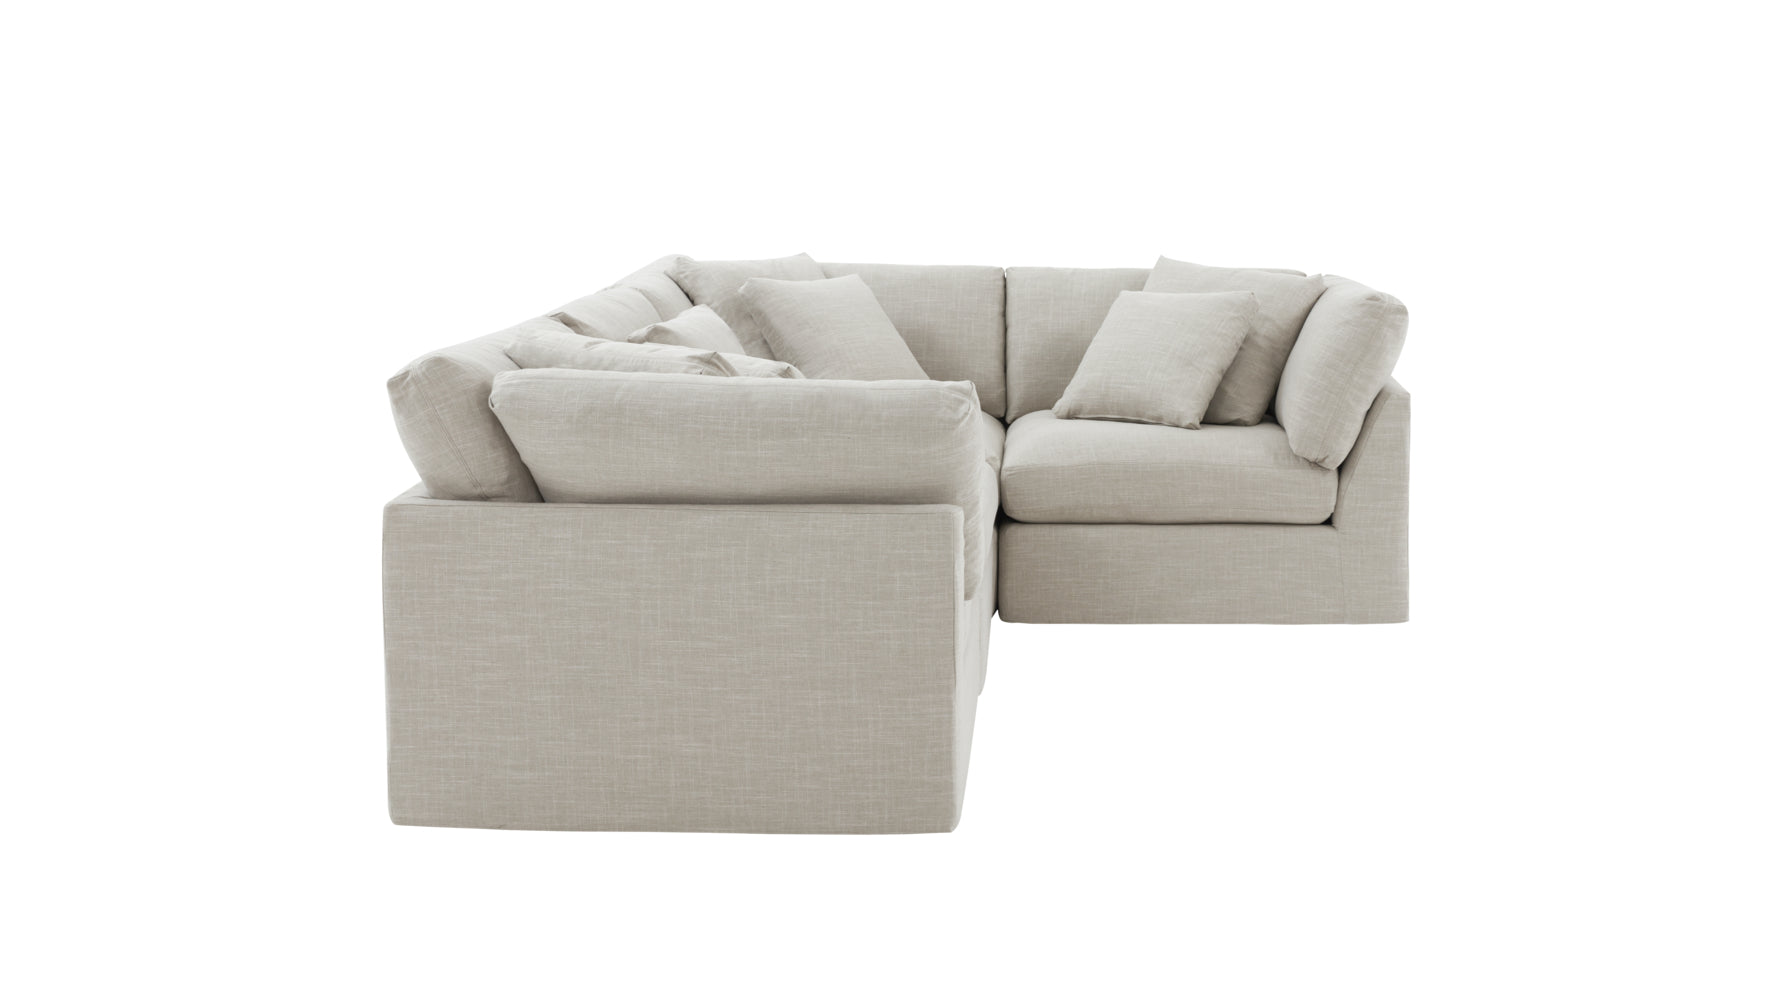 Get Together™ 4-Piece Modular Sectional Closed, Large, Light Pebble - Image 5